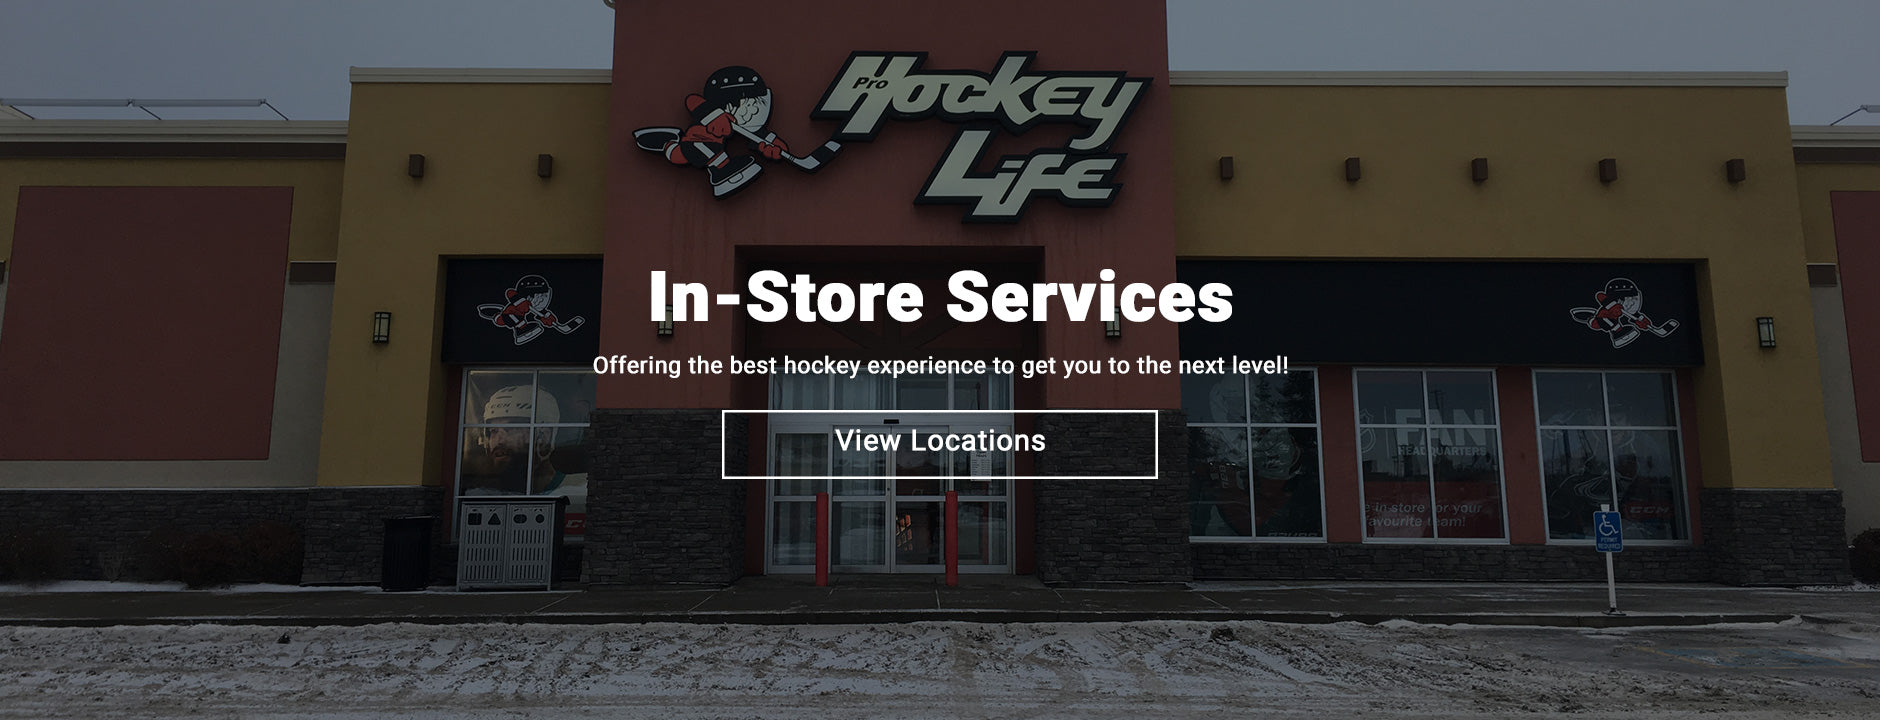 Pro Hockey Life – Vaughan Mills  Professional Use Only, No Warranty.